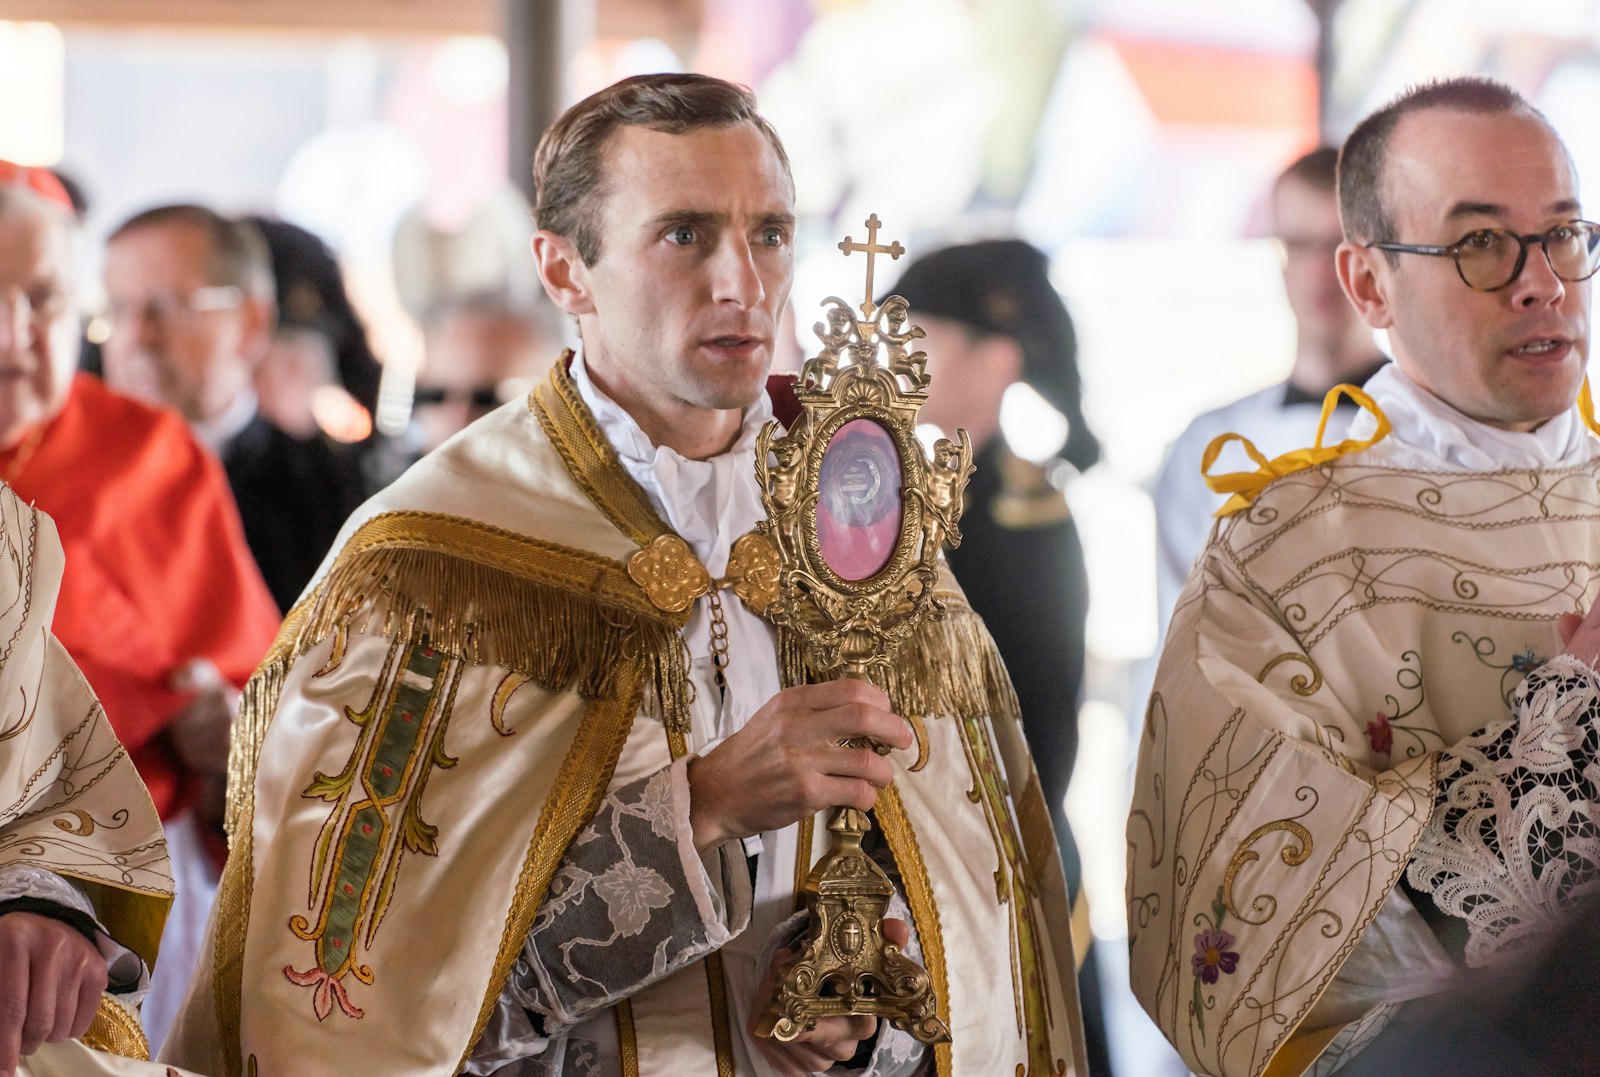 Canon ﻿Jean-Baptiste Commins, ICKSP, rector of St. Joseph Shrine, carries a relic of St. Joseph for veneration during a public procession through Detroit's Eastern Market.